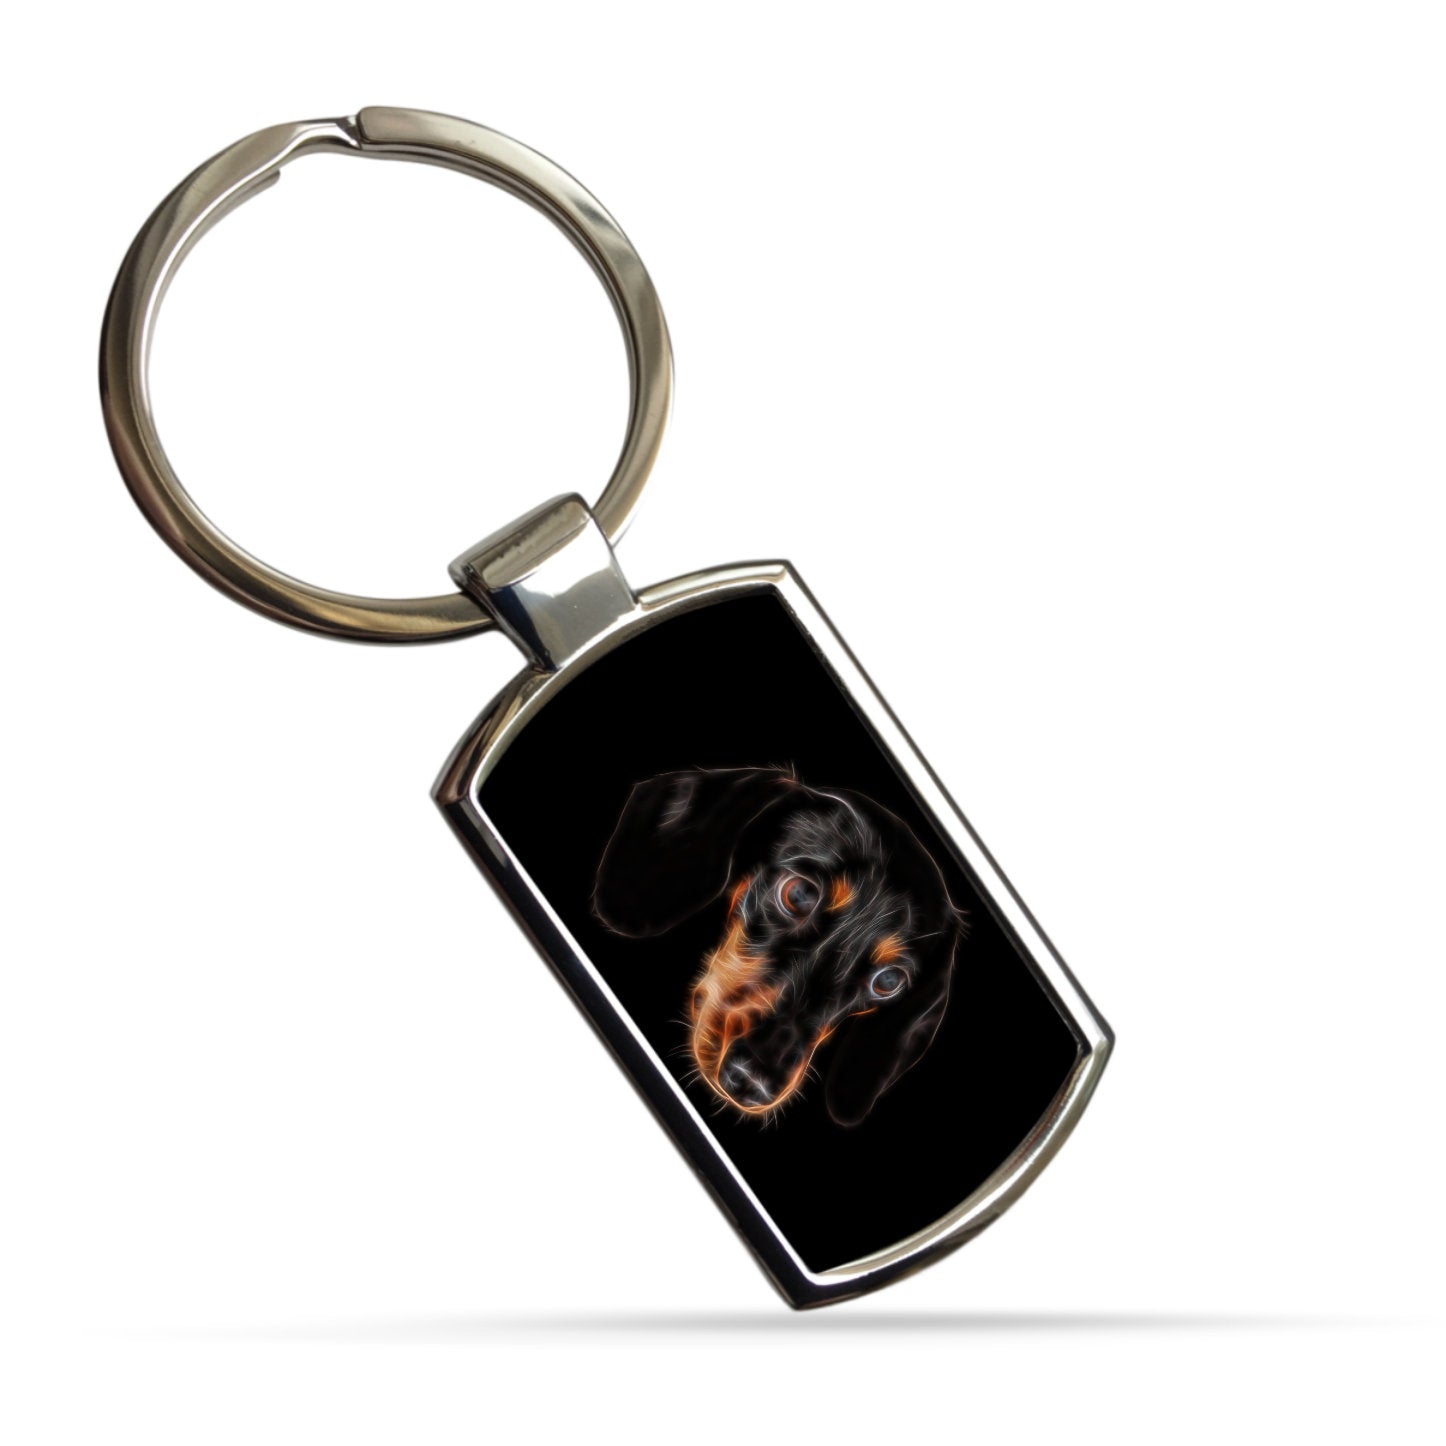 Dachshund Keychain with Stunning Fractal Art Design. Black and Tan or Chocolate